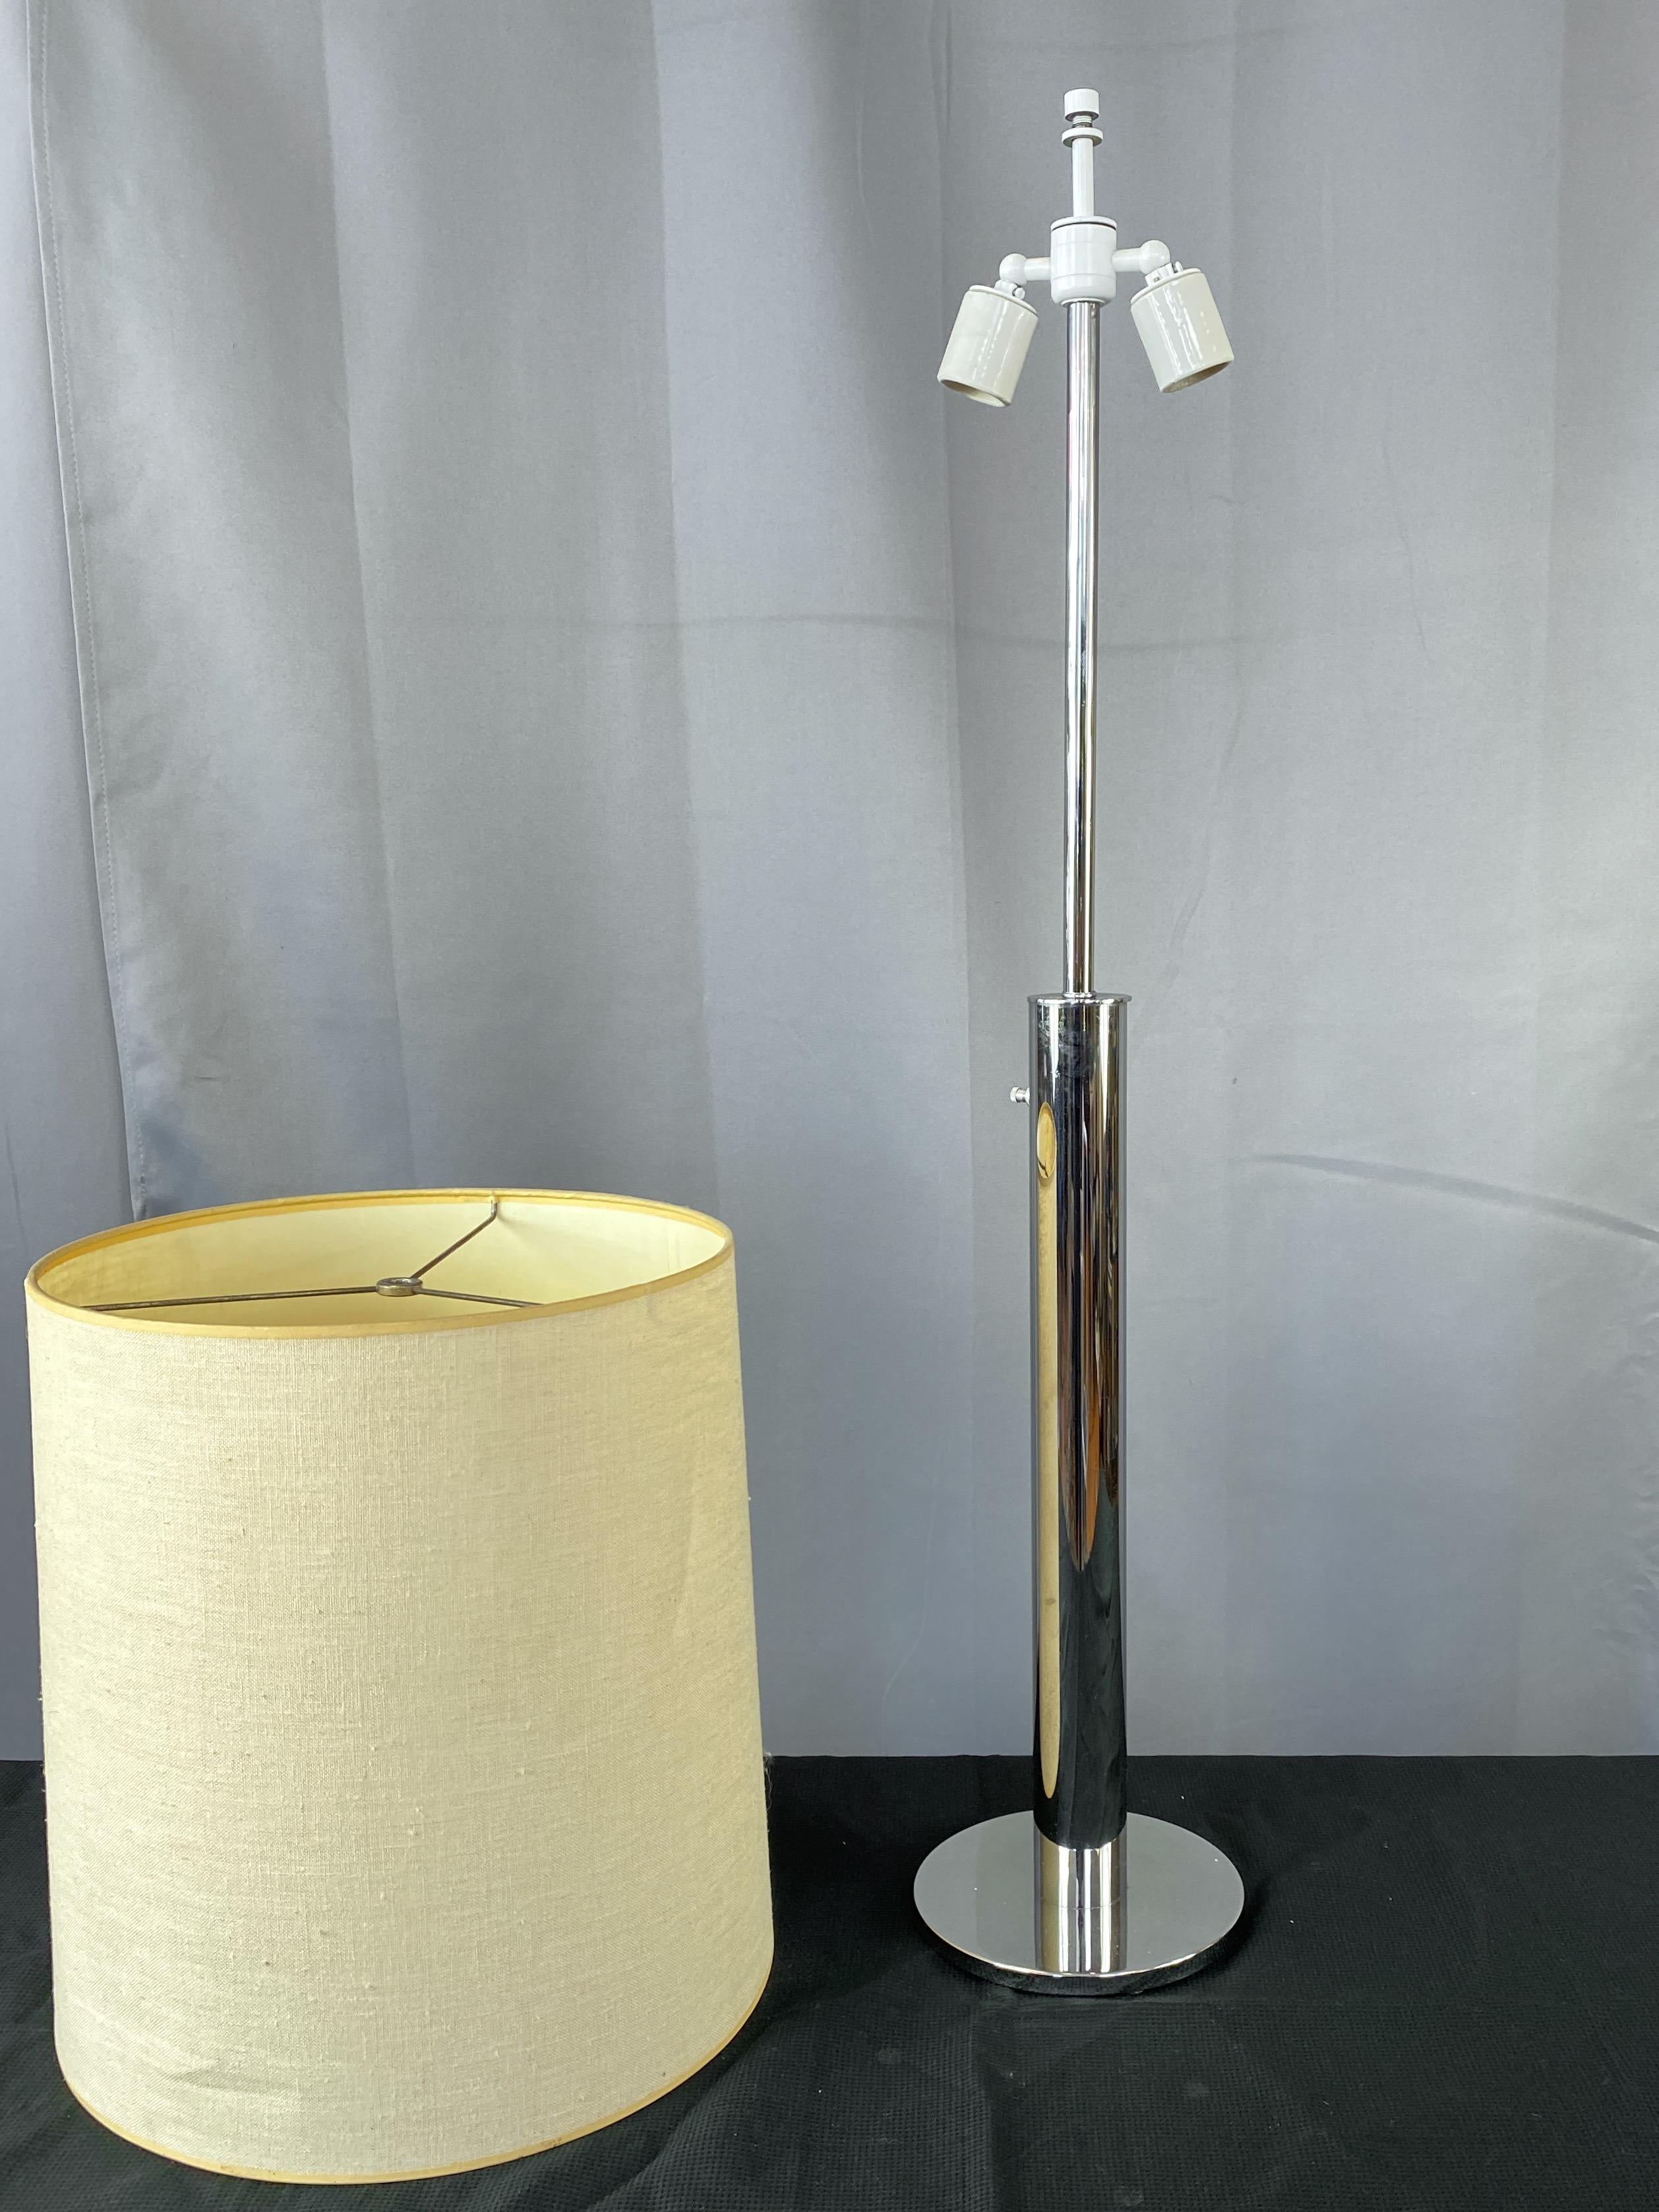 American Nessen Tall Minimalist Chrome Table Lamp with Original Shade, c. 1970 For Sale